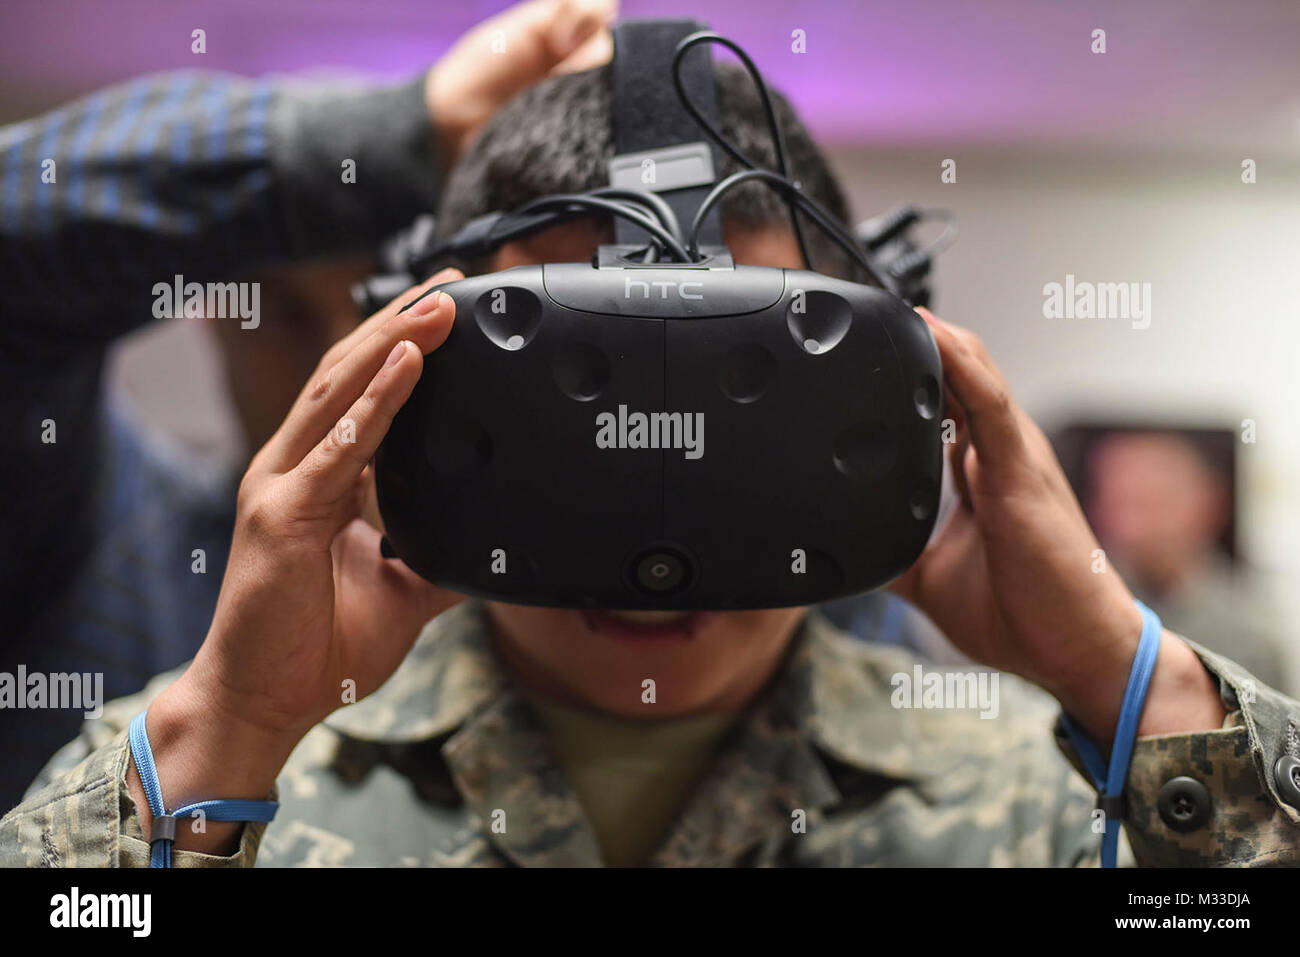 A 366th Training Squadron electrical systems apprentice course student at Sheppard Air Force Base, Texas, puts on a virtual reality headset Jan. 26, 2018, at Sheppard AFB. The digital design team at Sheppard hosted their first technology demonstration for students to give the Airmen the opportunity to experience and see what could be a future training tool, and for the digital design team to make adjustments to better help the Airmen in training. (U.S. Air Force Stock Photo